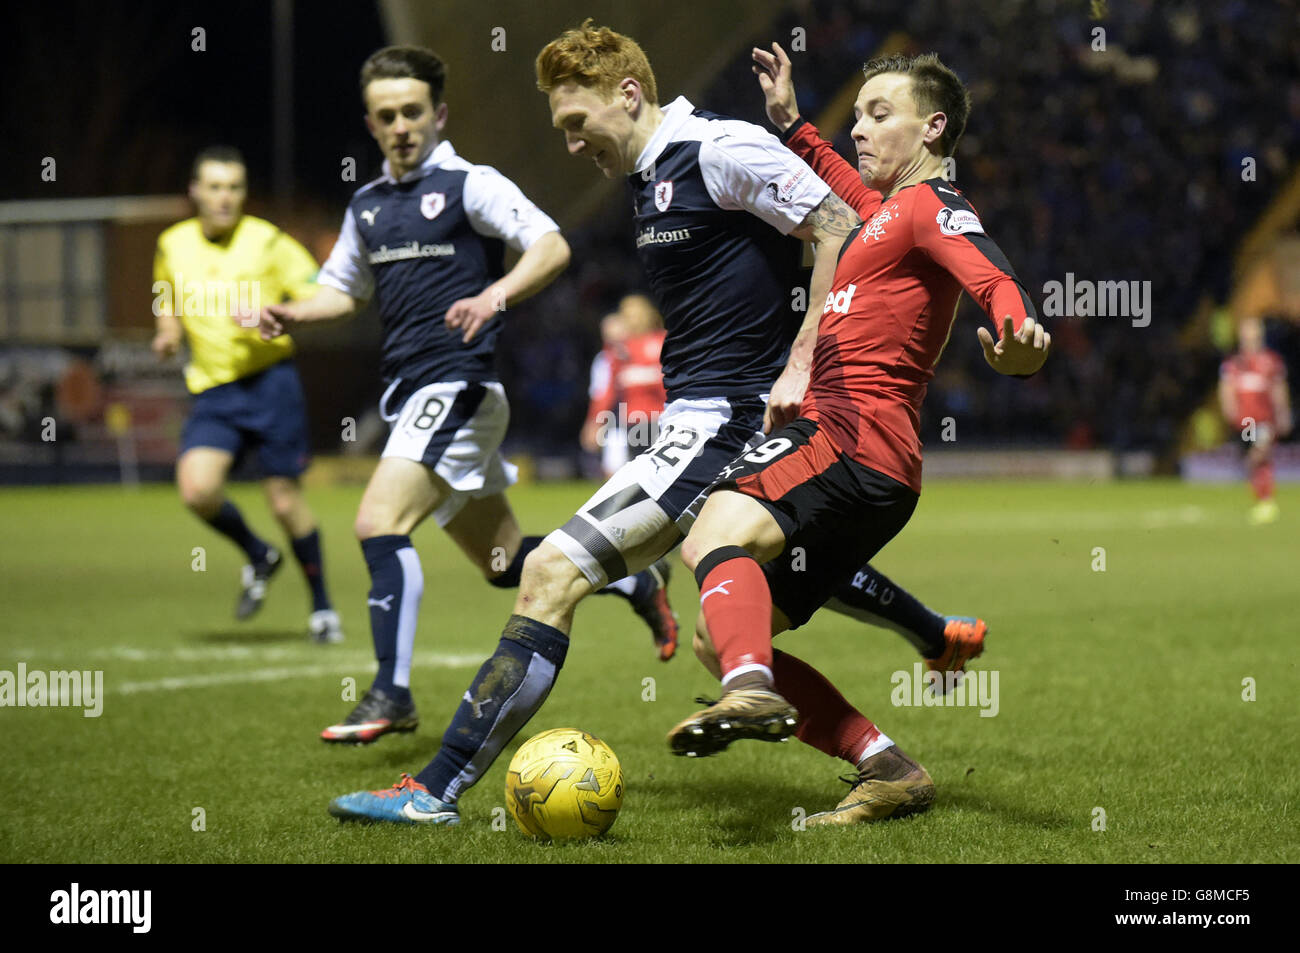 Raith Rovers' Rory McKeown and Rangers' Barry McKay (right) battle for the ball during the Ladbrokes Scottish Championship match at Stark's Park, Kirkcaldy. Stock Photo